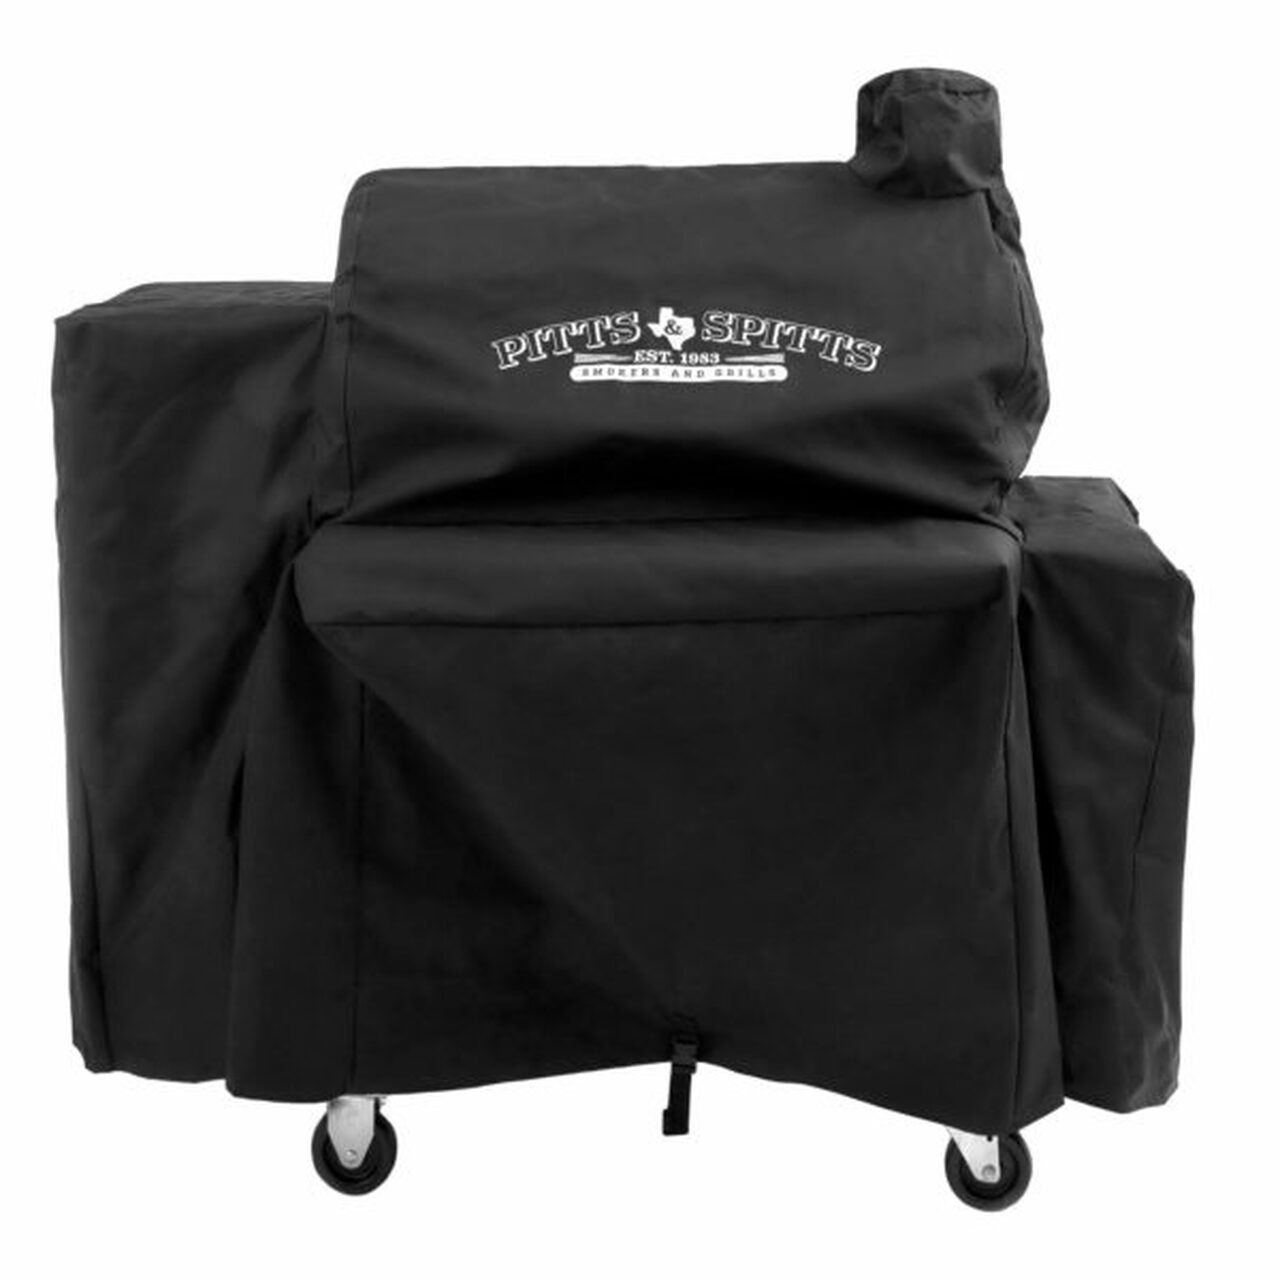 Pitts & Spitts Universal Maverick Grill Cover